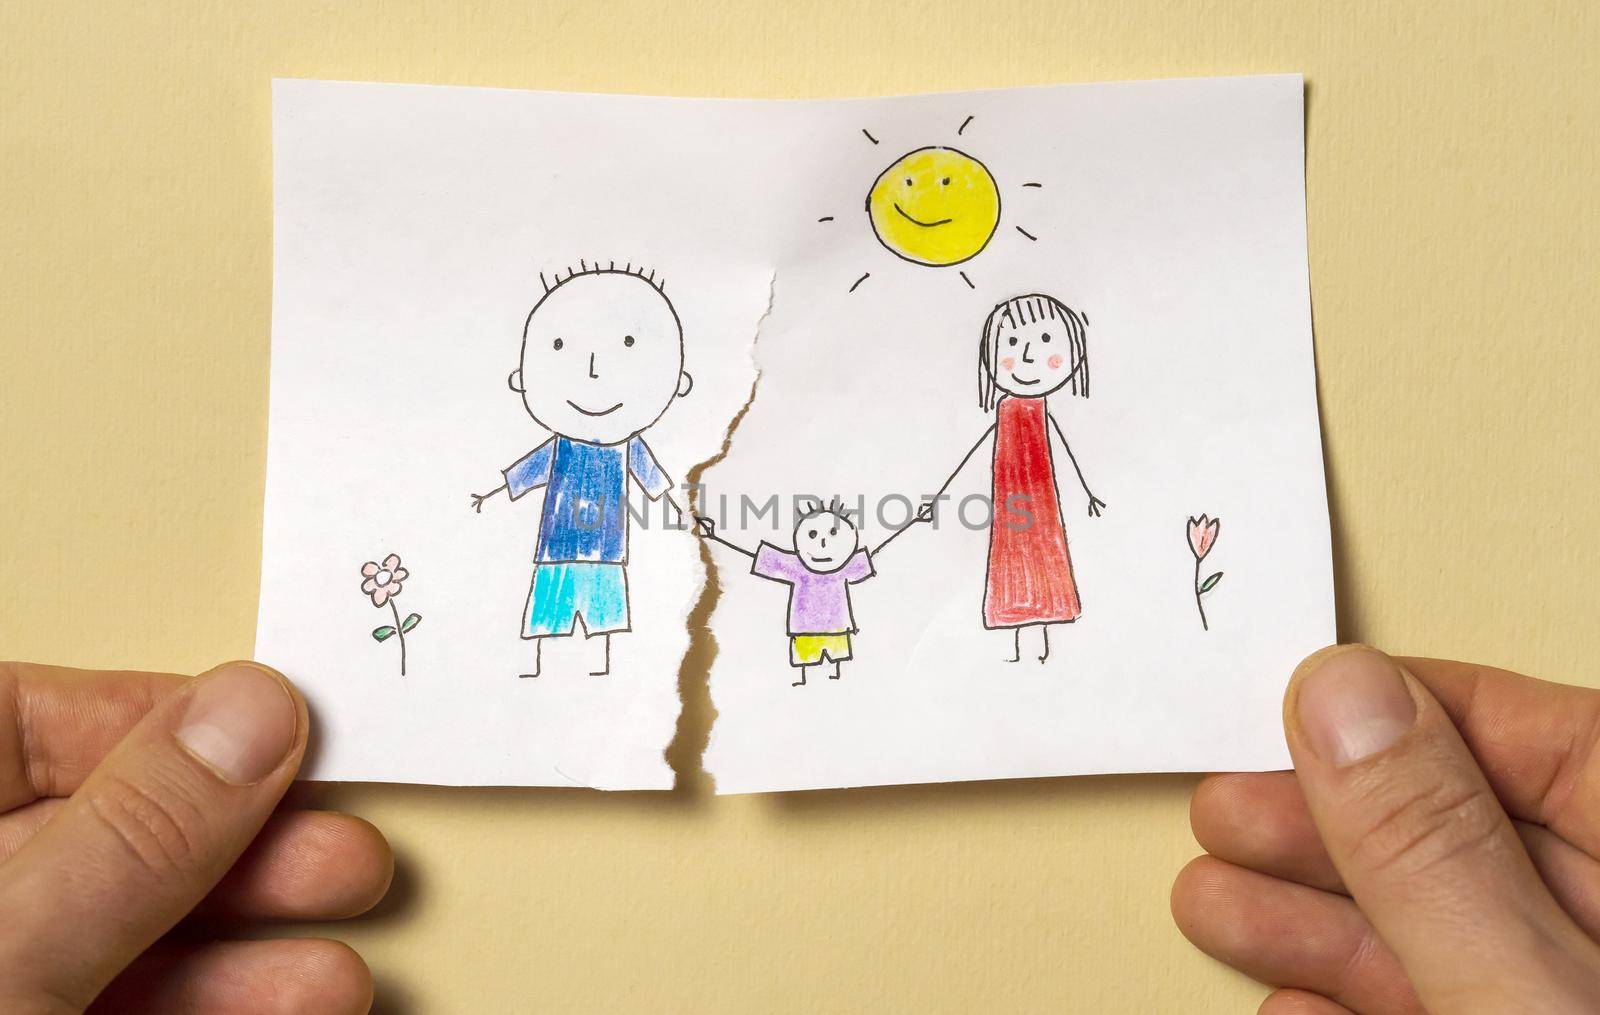 A child's drawing, which depicts a mom, dad and a child, is torn in half by man's hands. Divorce, relationship difficulties, child problems.